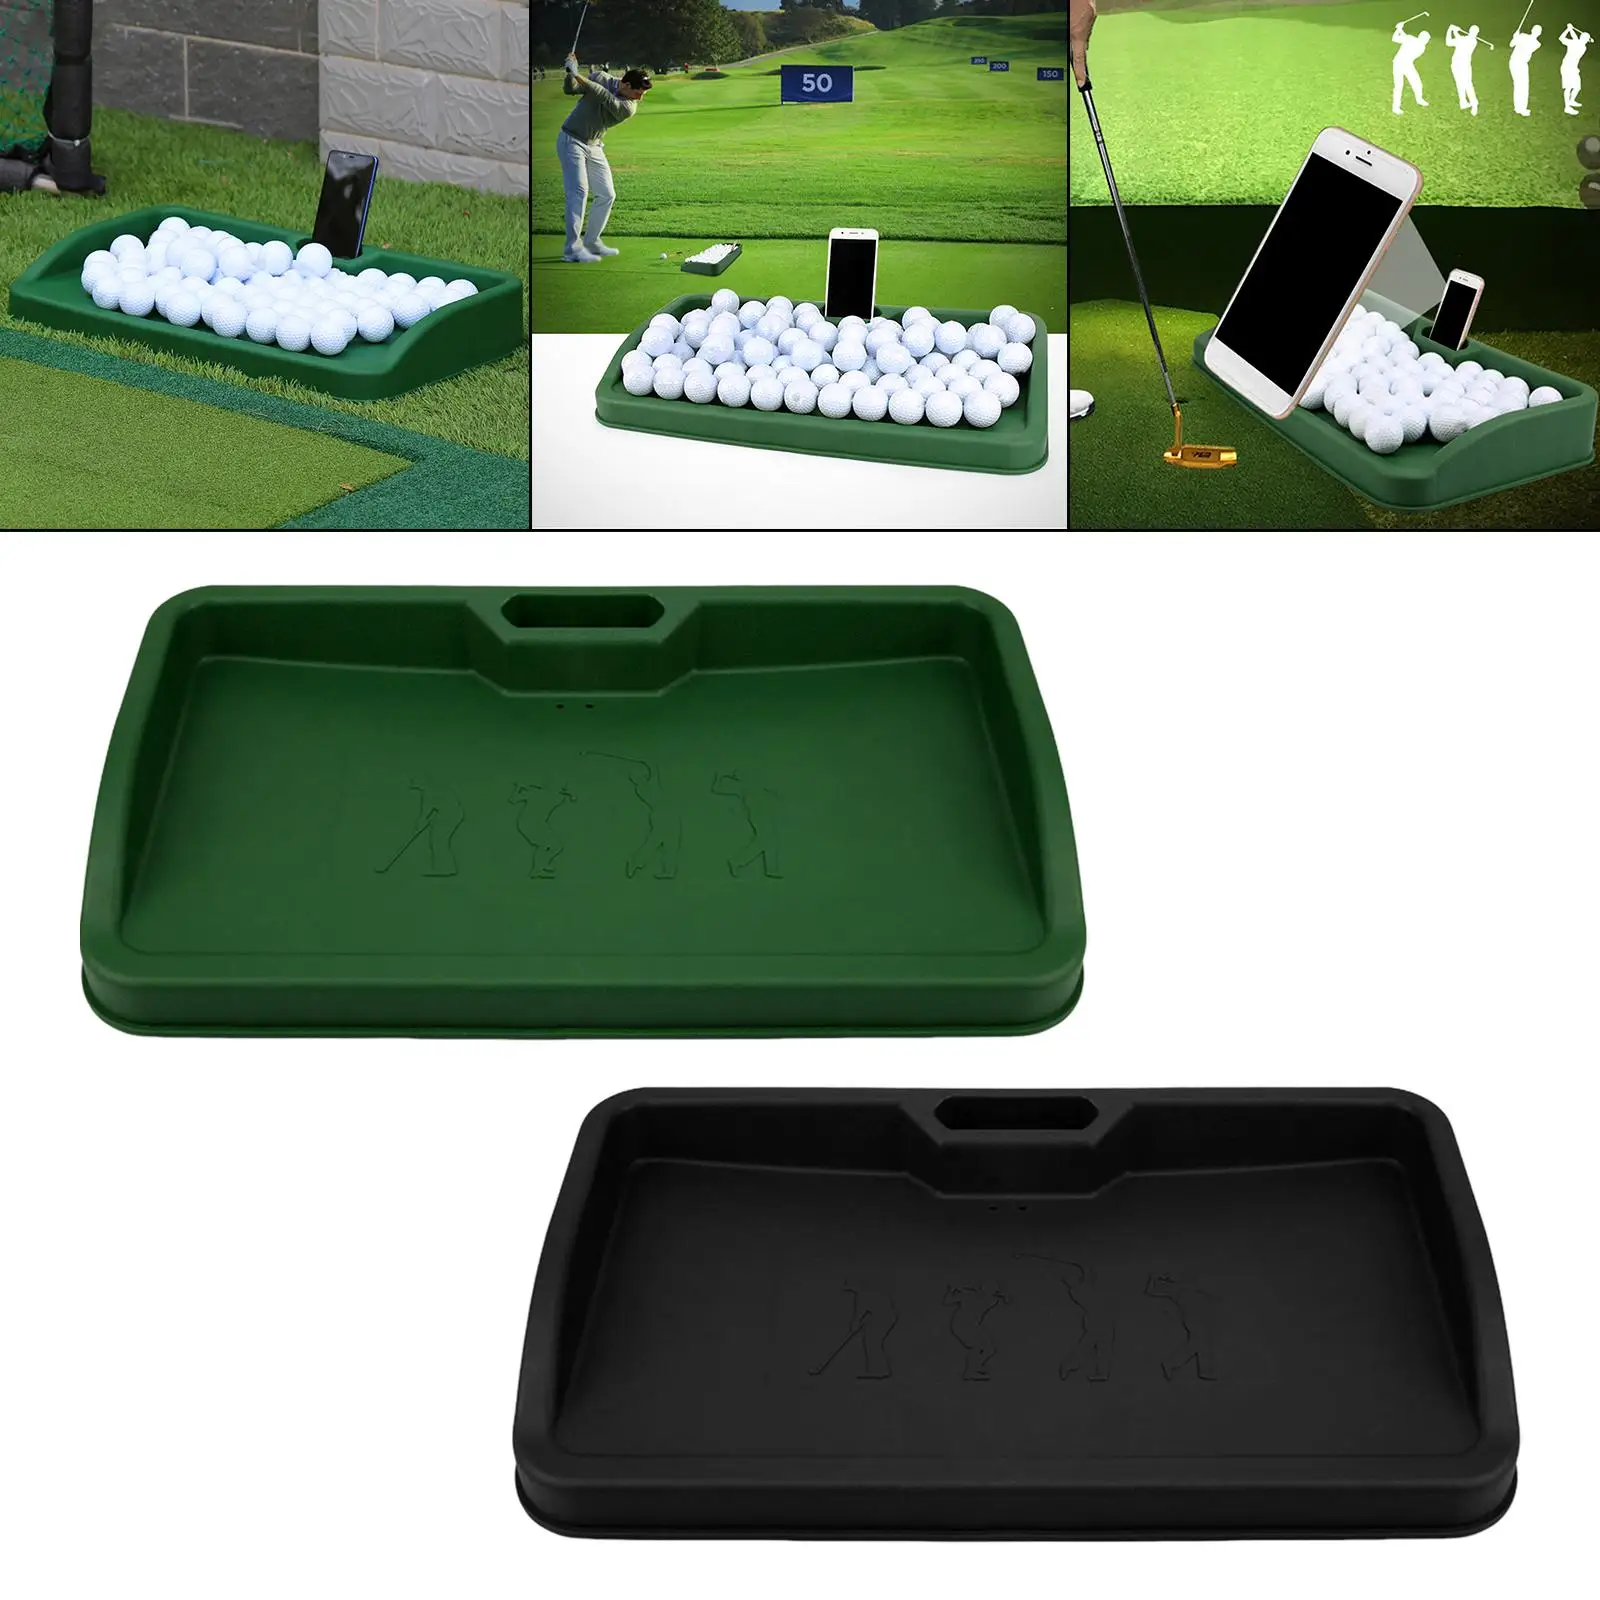 Soft Rubber Golf Ball Tray, Golfing Supplies Container Professional Heavy Duty